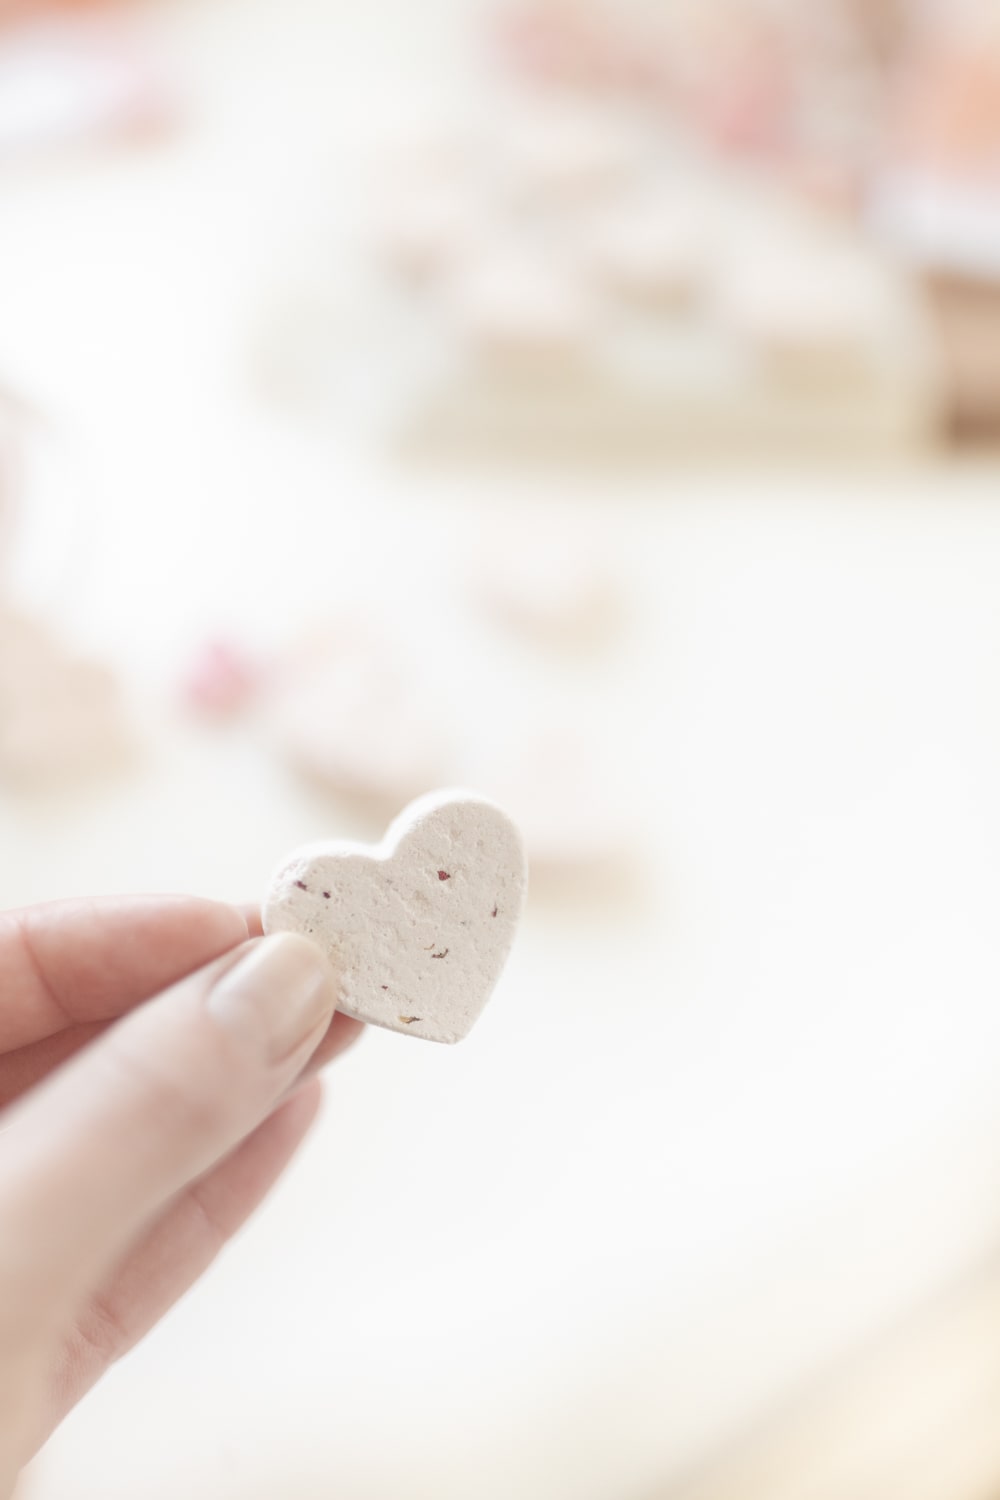 DIY shower melts tutorial from blogger Stephanie Ziajka on Diary of a Debutante